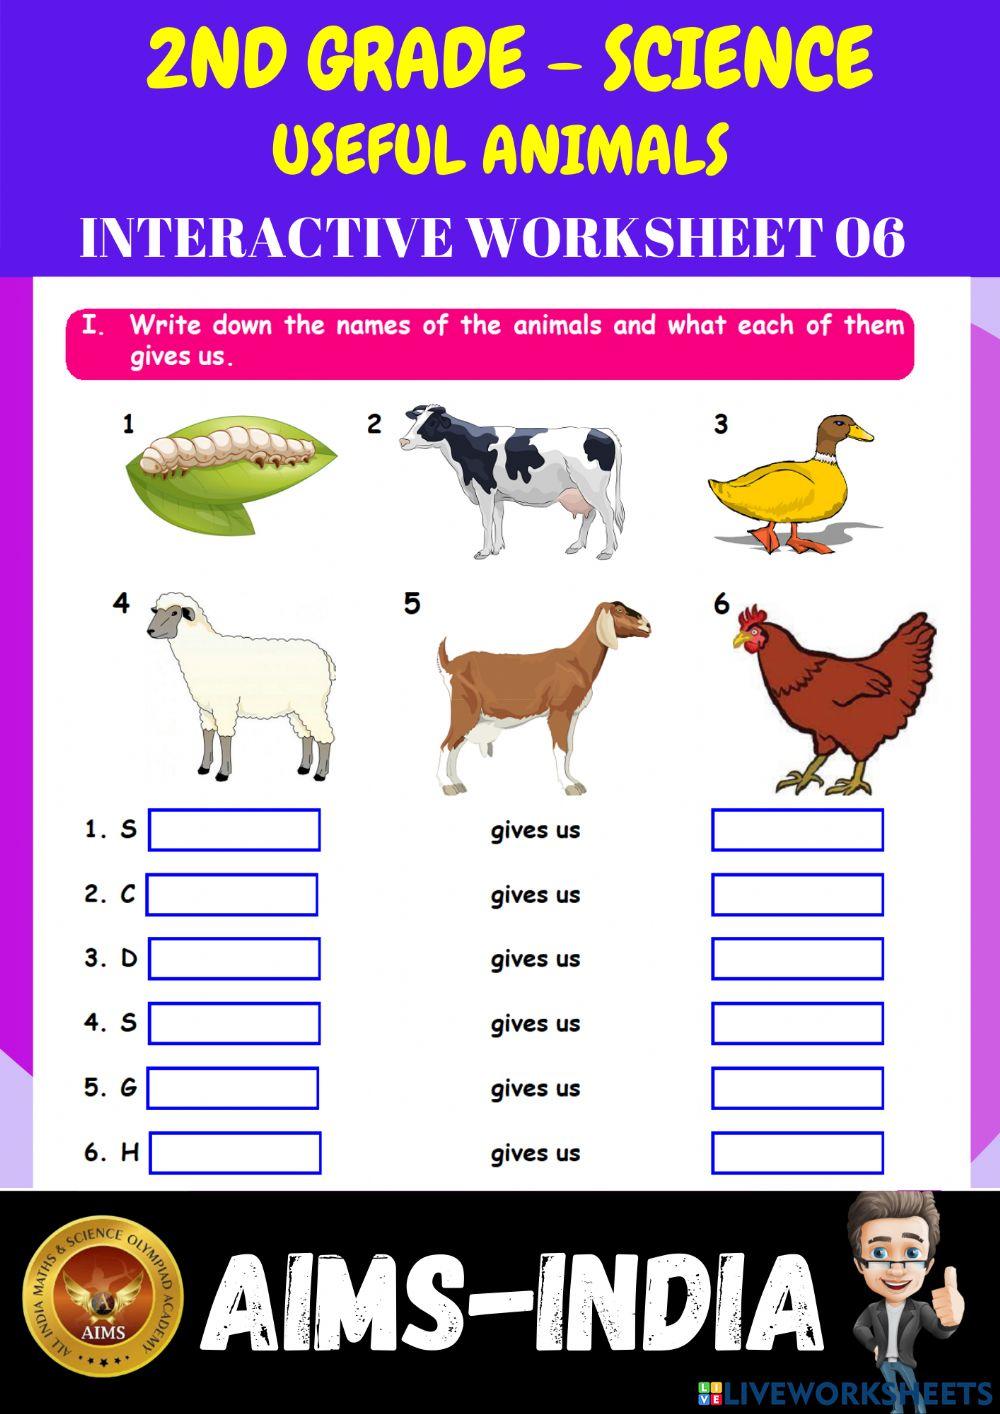 2nd-science-ps06-useful animals